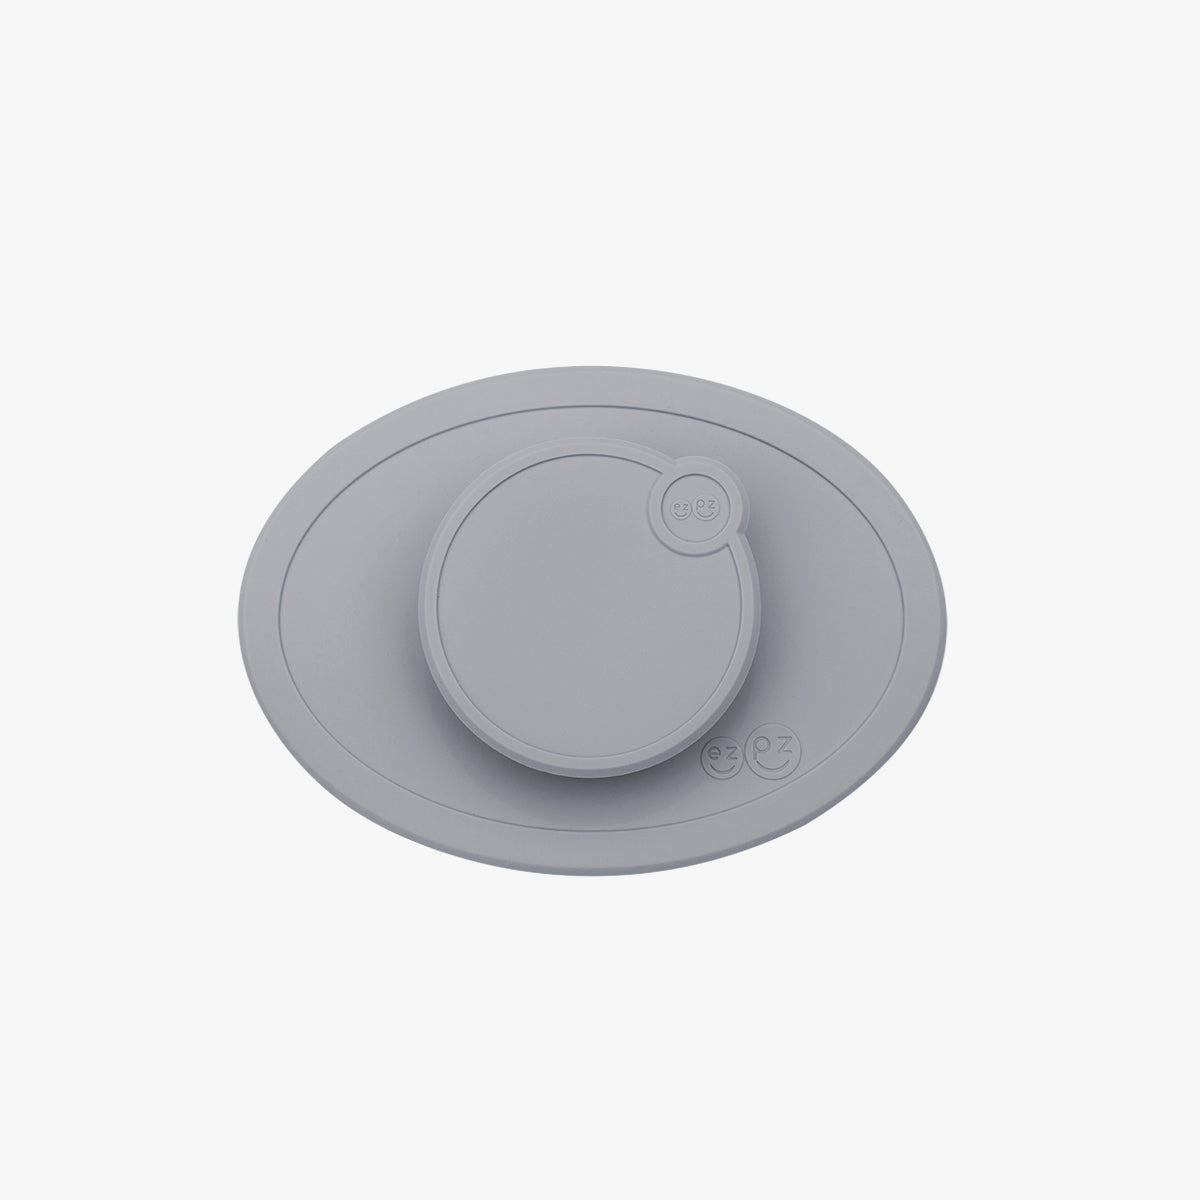 Tiny Bowl Lid in Gray / Storage Lids for the Tiny Bowl by ezpz / Silicone Lid for Baby Bowl